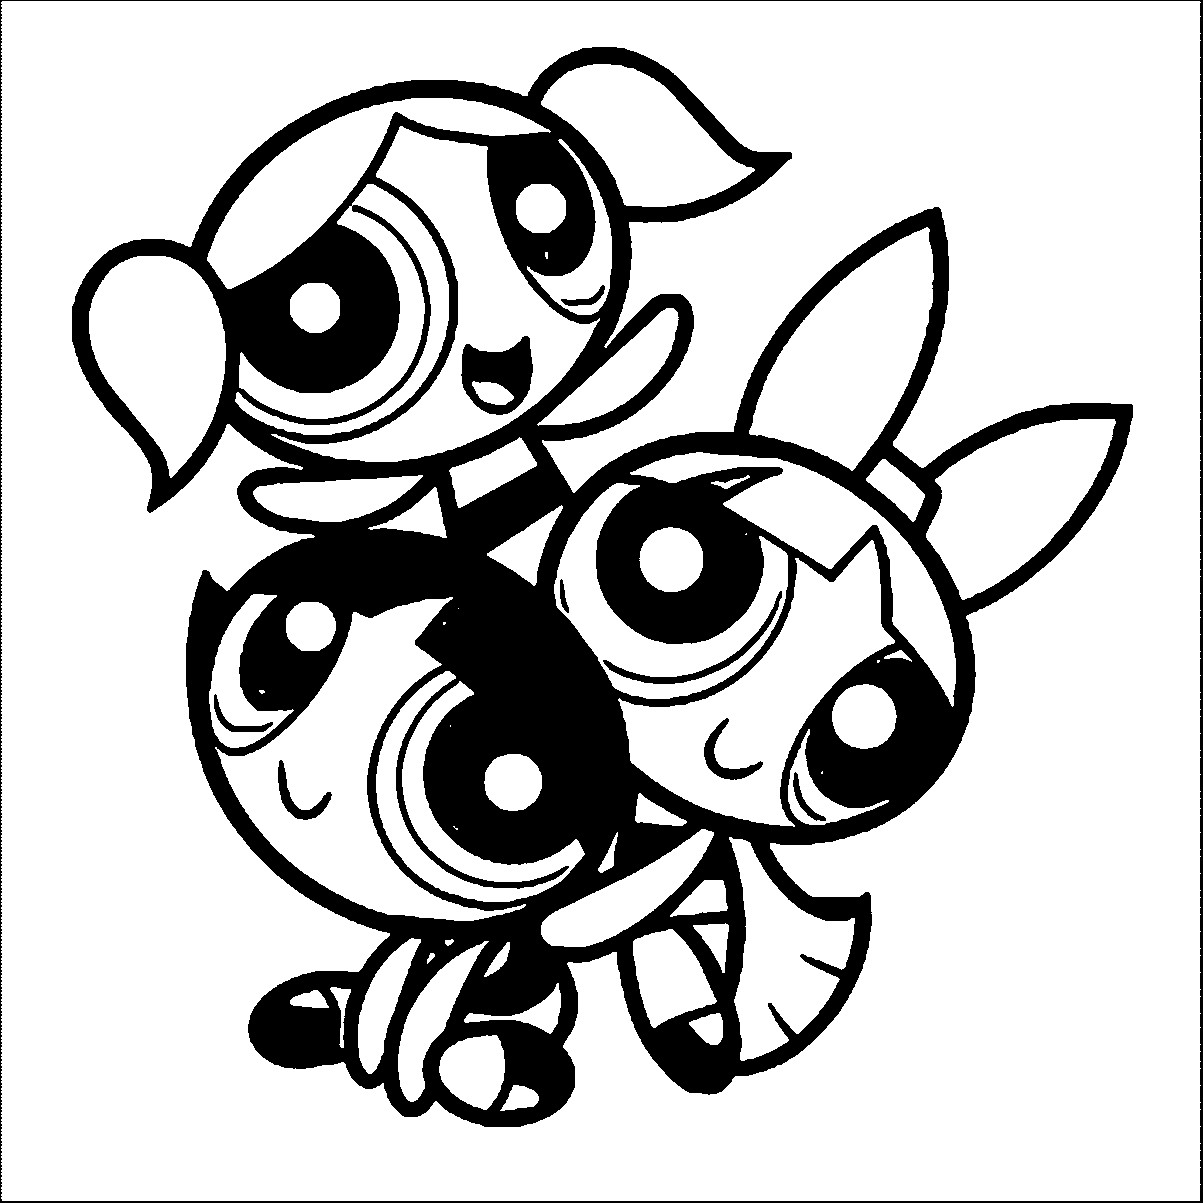 The Powerpuff Girls Coloring Pages
 Powerpuff Girls Coloring Pages